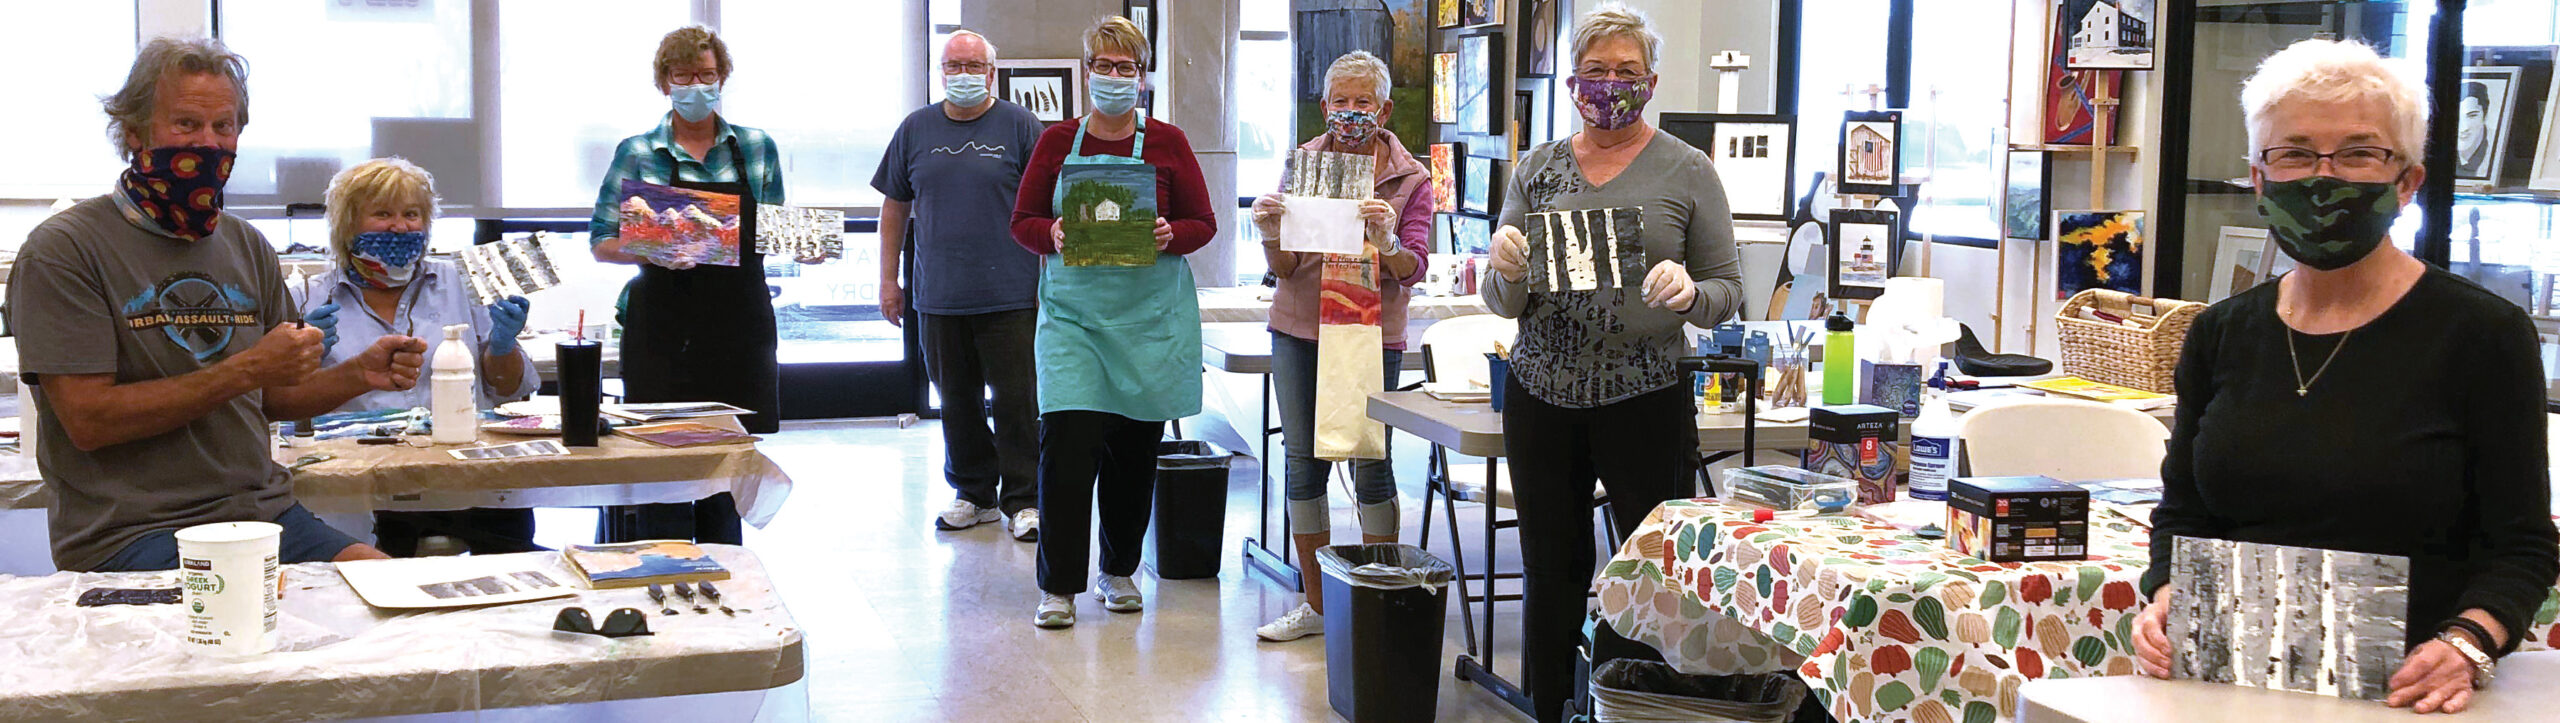 Participants in Nils Johnson's Palette Knife Painting class (left to right): Marc Capel-Jones, Jeana Capel-Jones, Connie Lundberg, Nils Johnson, Marge Mathers, Carol Breen, Sharon Nergaard, and Jullian Moon